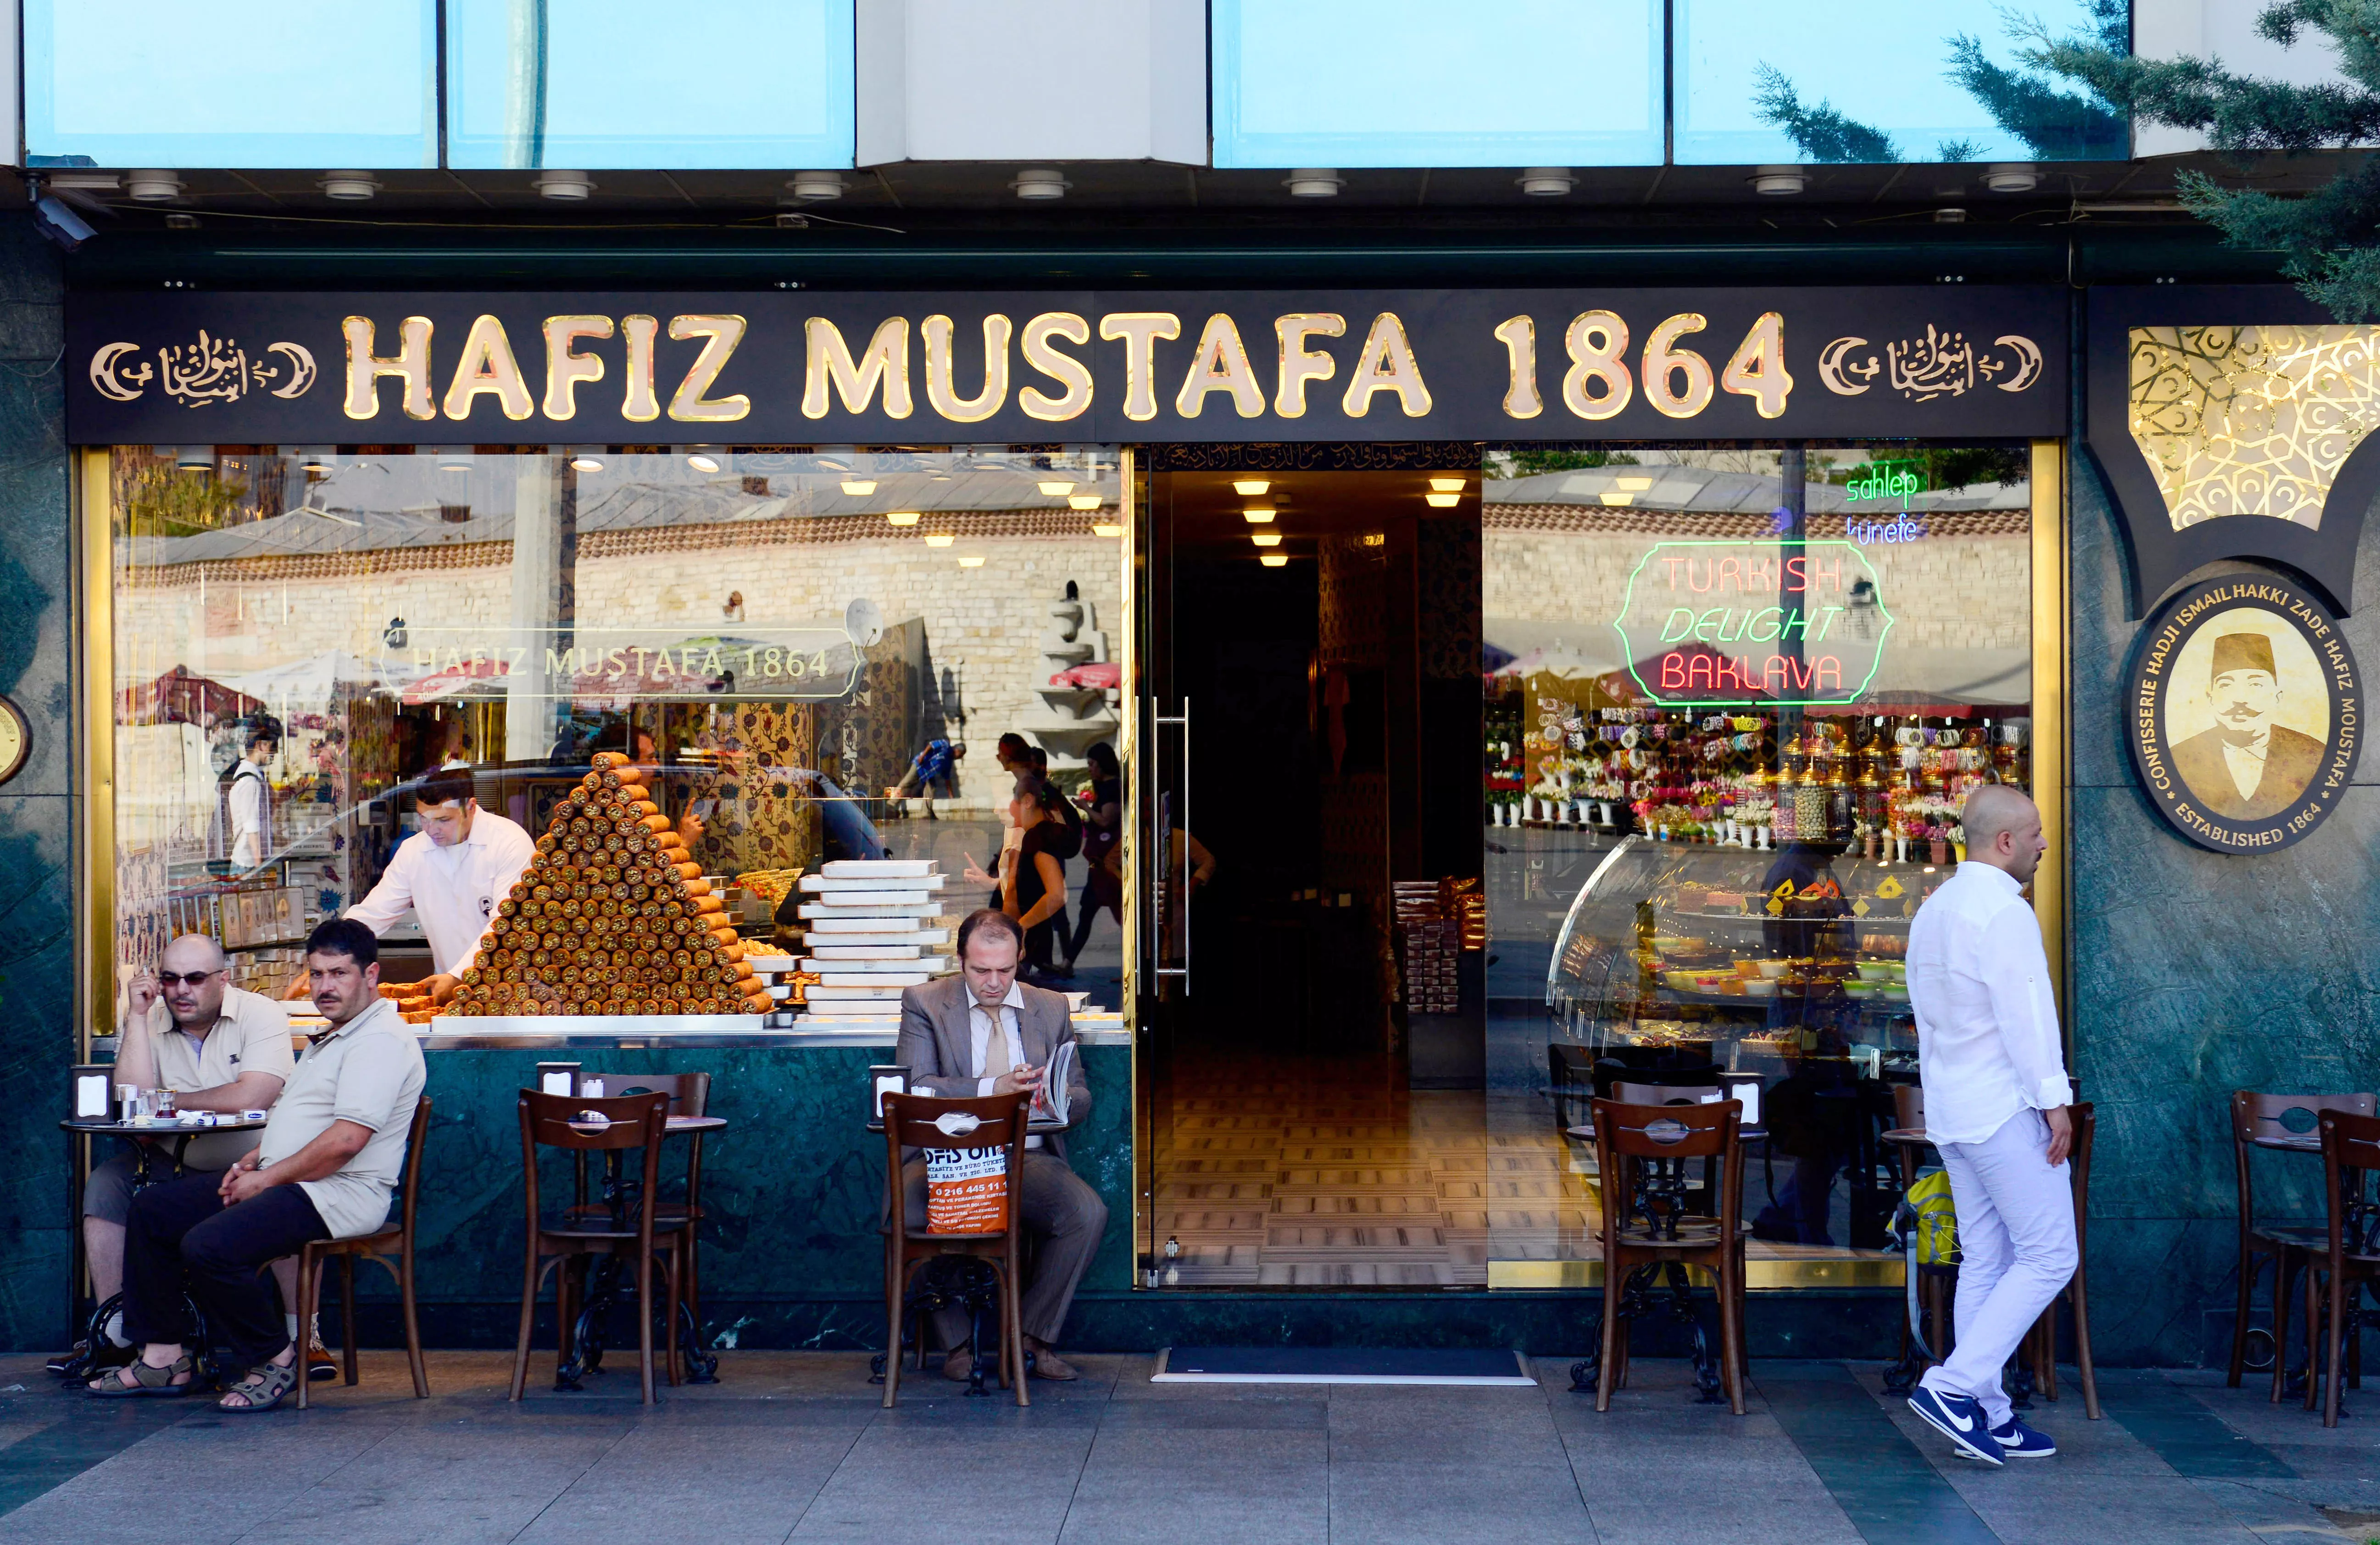 Hafiz Mustasa in Turkey, Central Asia | Confectionery & Bakeries - Rated 6.8